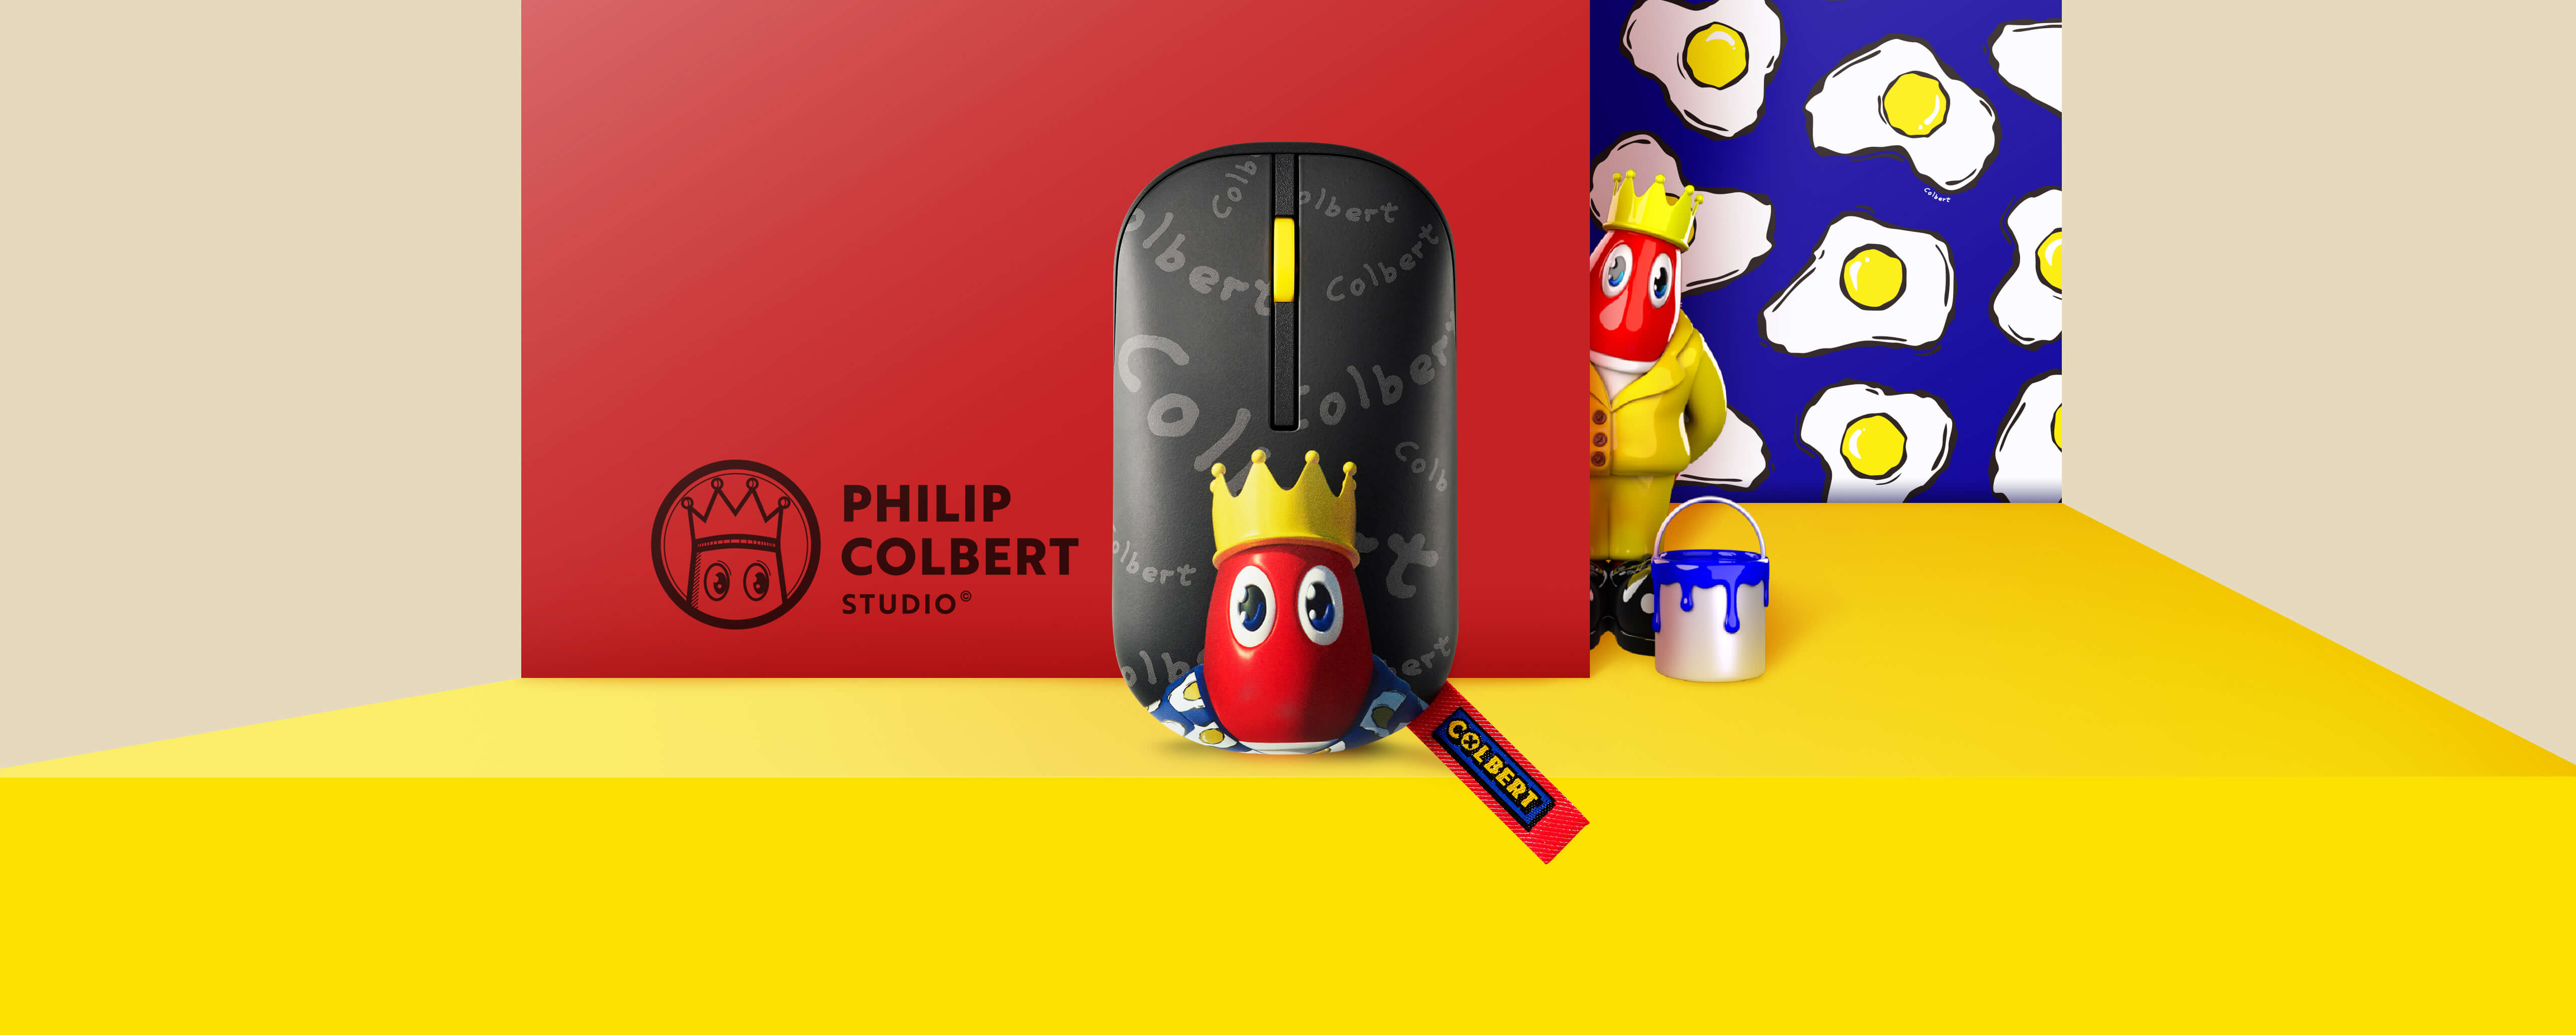 ASUS Marshmallow Mouse MD100 Philip Colbert Edition features a black finish and Philip Colbert’s iconic lobster cartoon. A lobster figure in a yellow suit stands out against a colorful background.